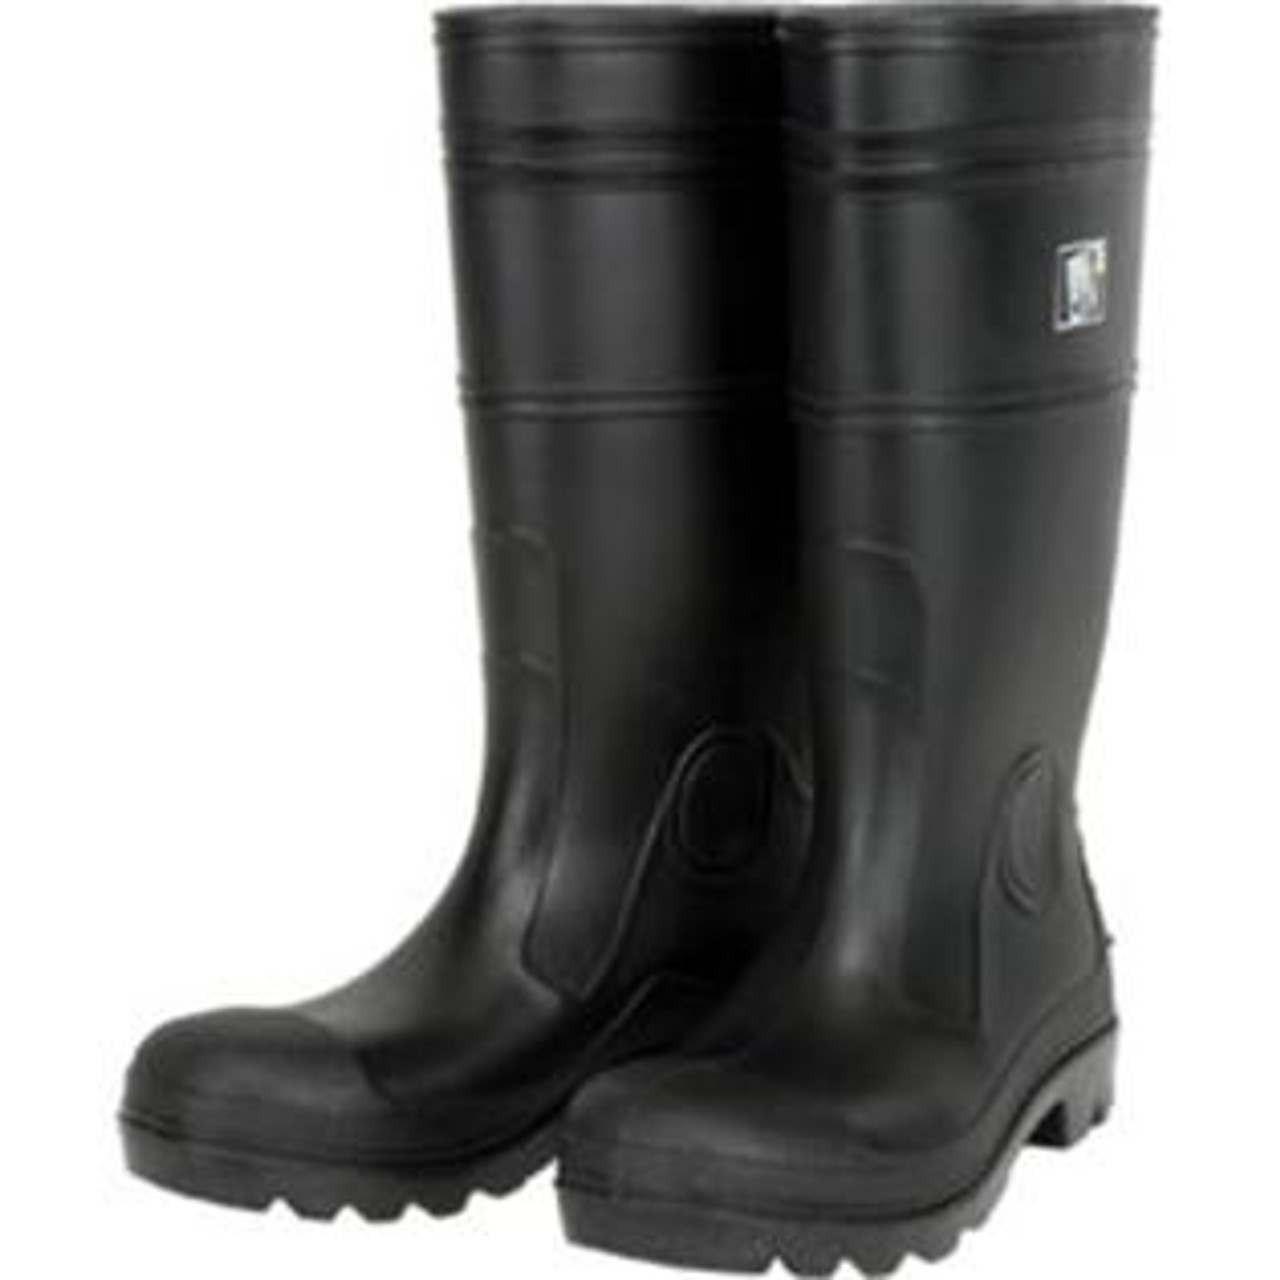 IMPA 190215 PAIR OF RUBBER BOOTS LONG Size 43 (28cm)